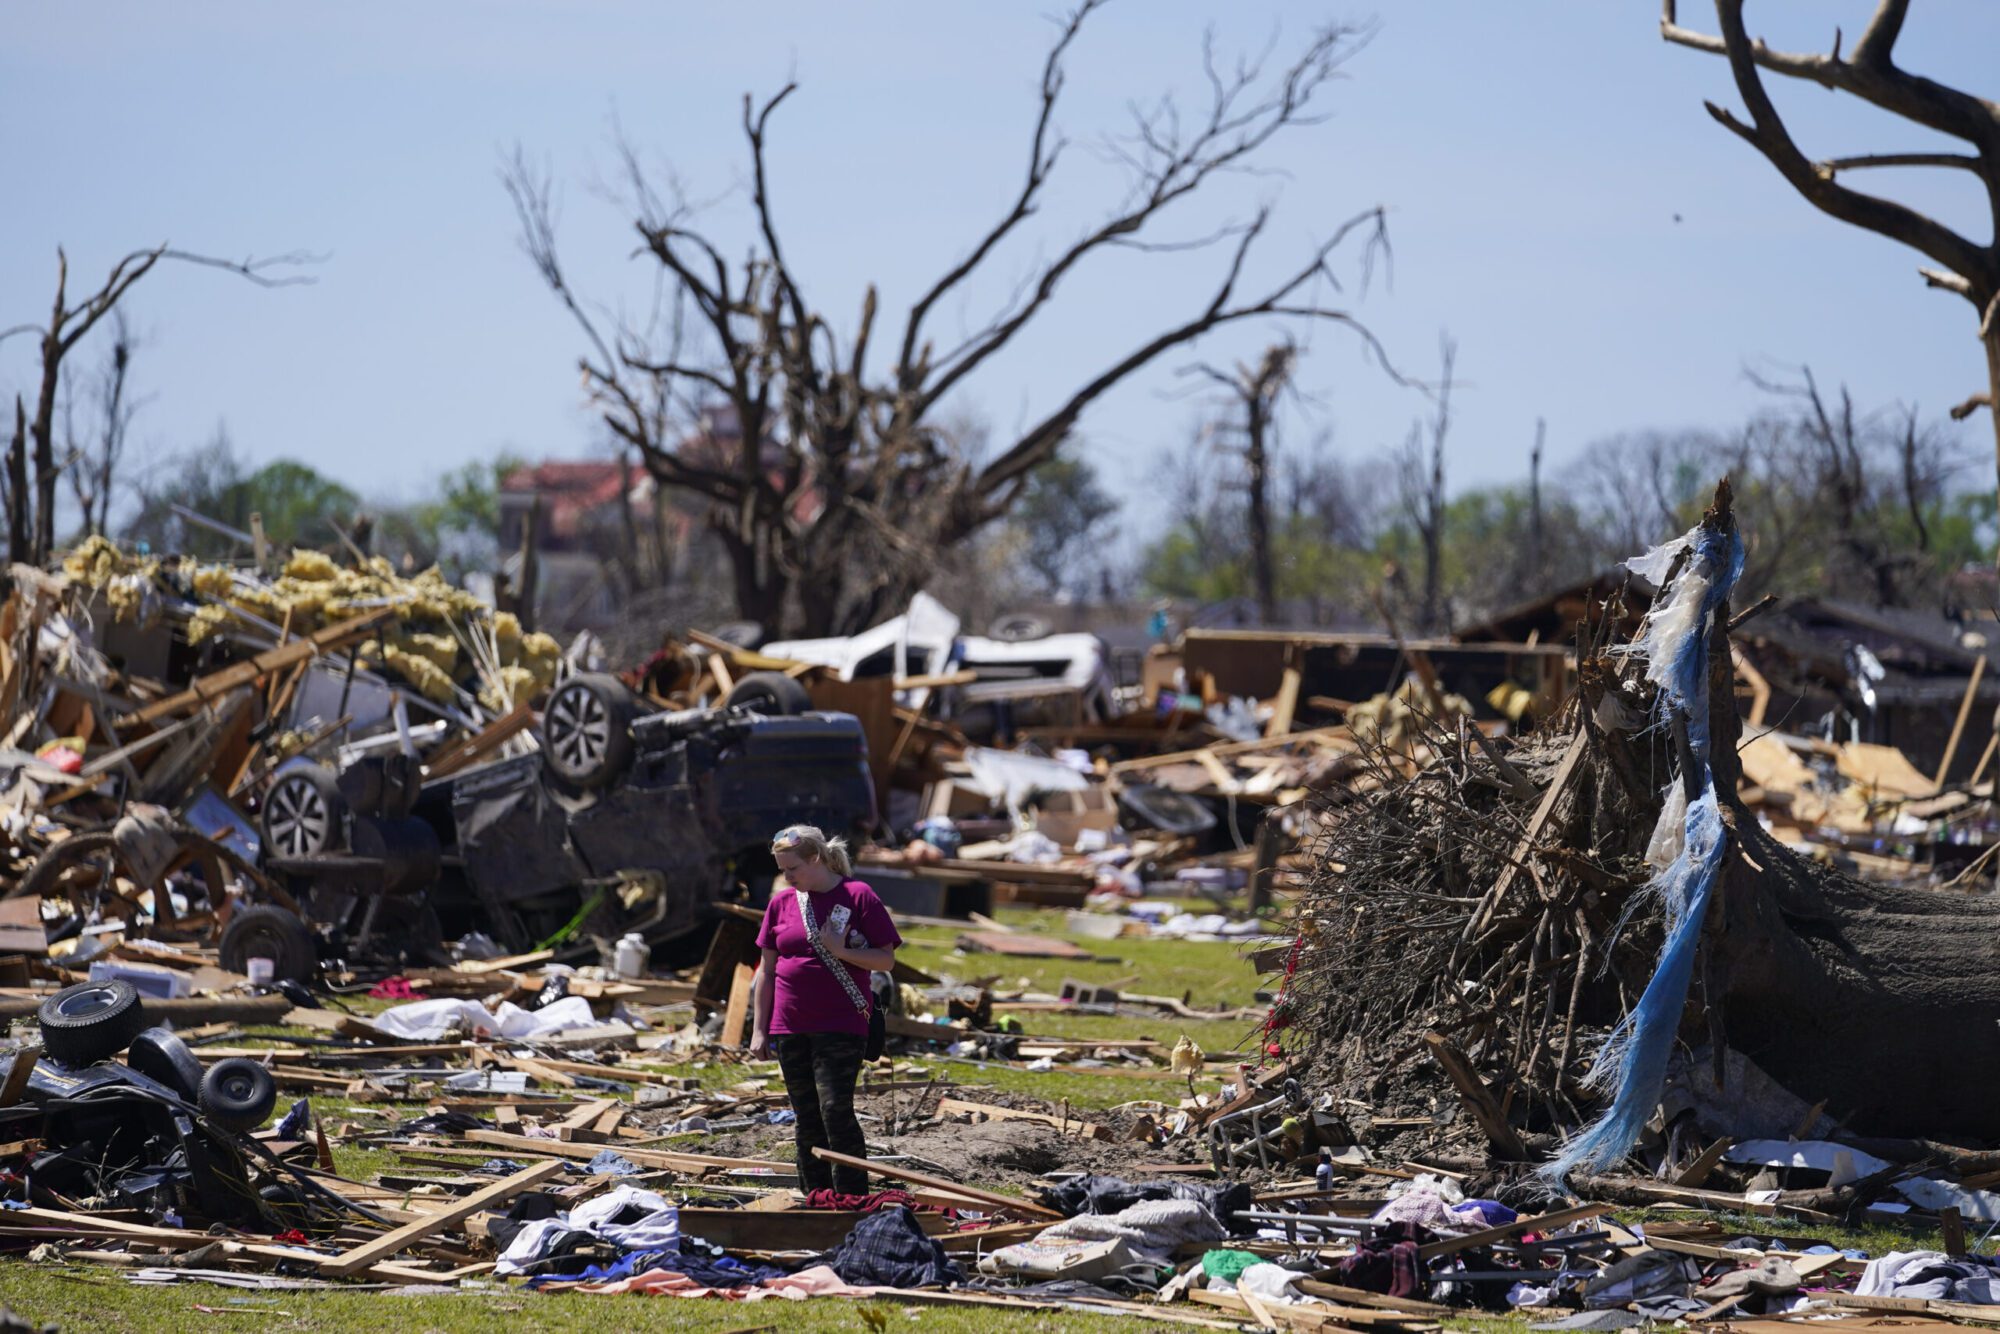 A woman walks near an uprooted tree, a flipped vehicle and debris from homes damaged by a tornado, Monday, March 27, 2023, in Rolling Fork, Miss. (AP Photo/Julio Cortez - Copyright 2023 The Associated Press. All rights reserved.)